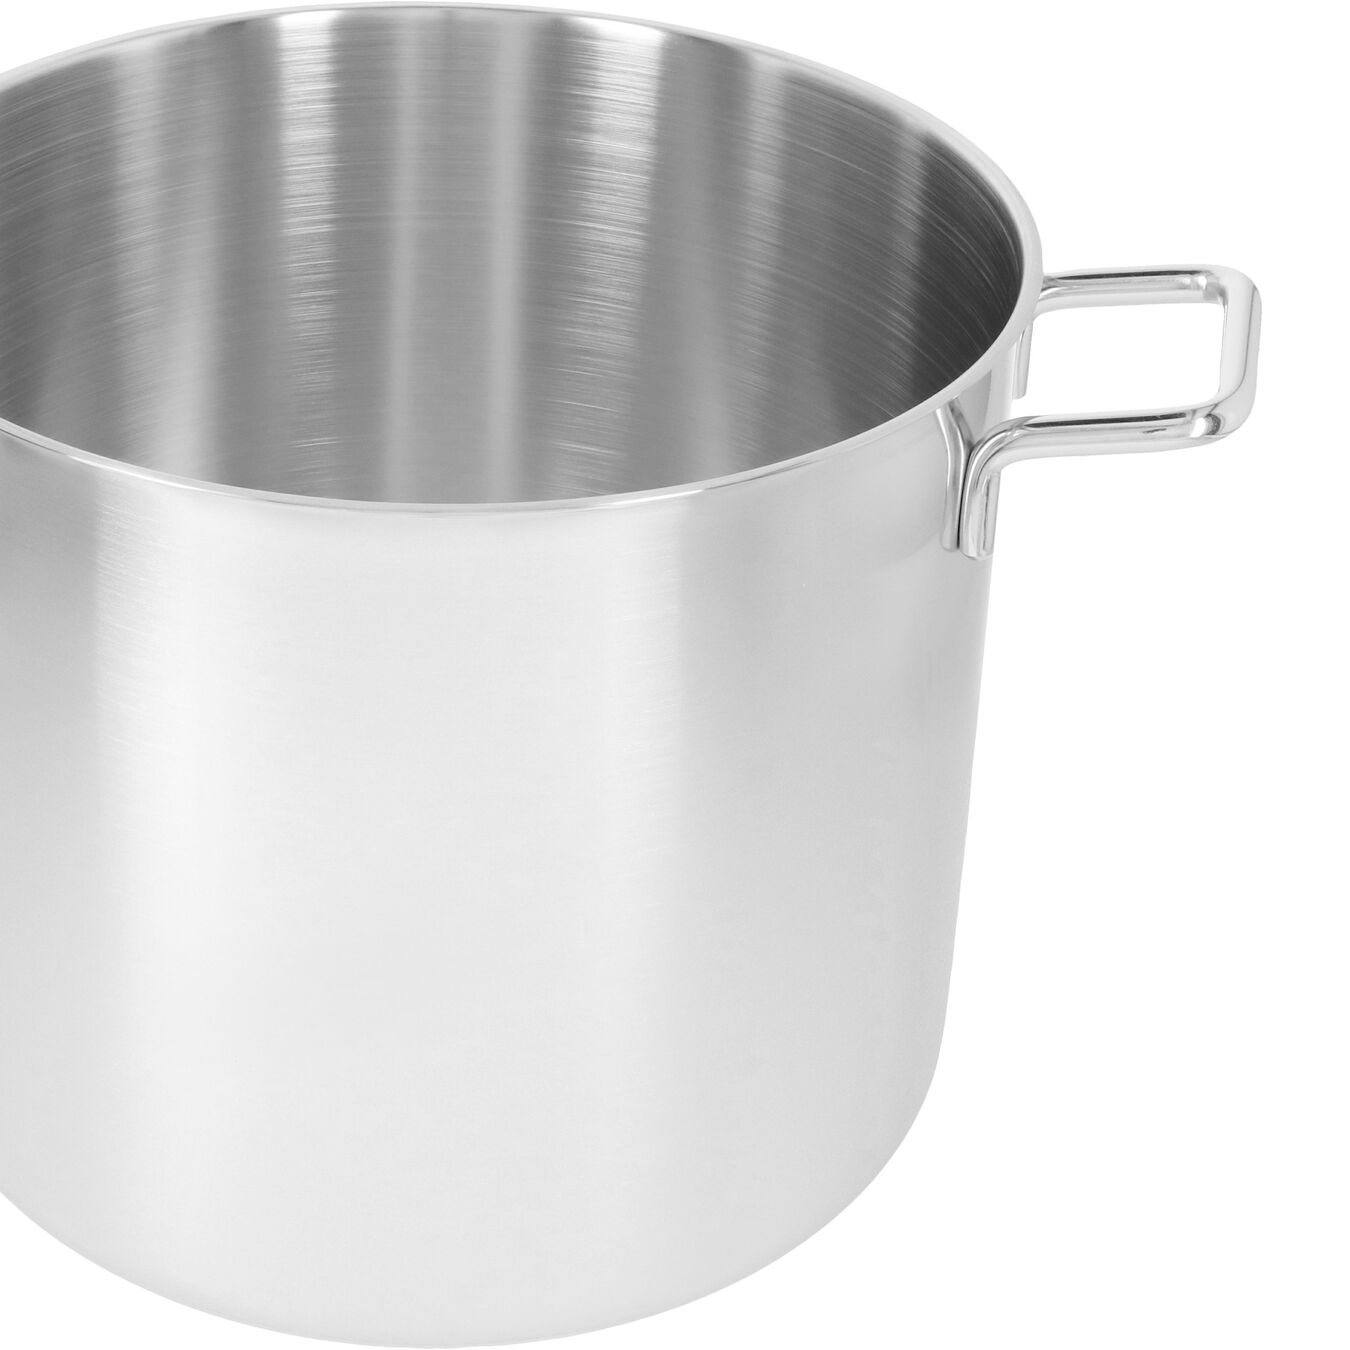 36 cm 18/10 Stainless Steel Stock pot with lid silver,,large 3